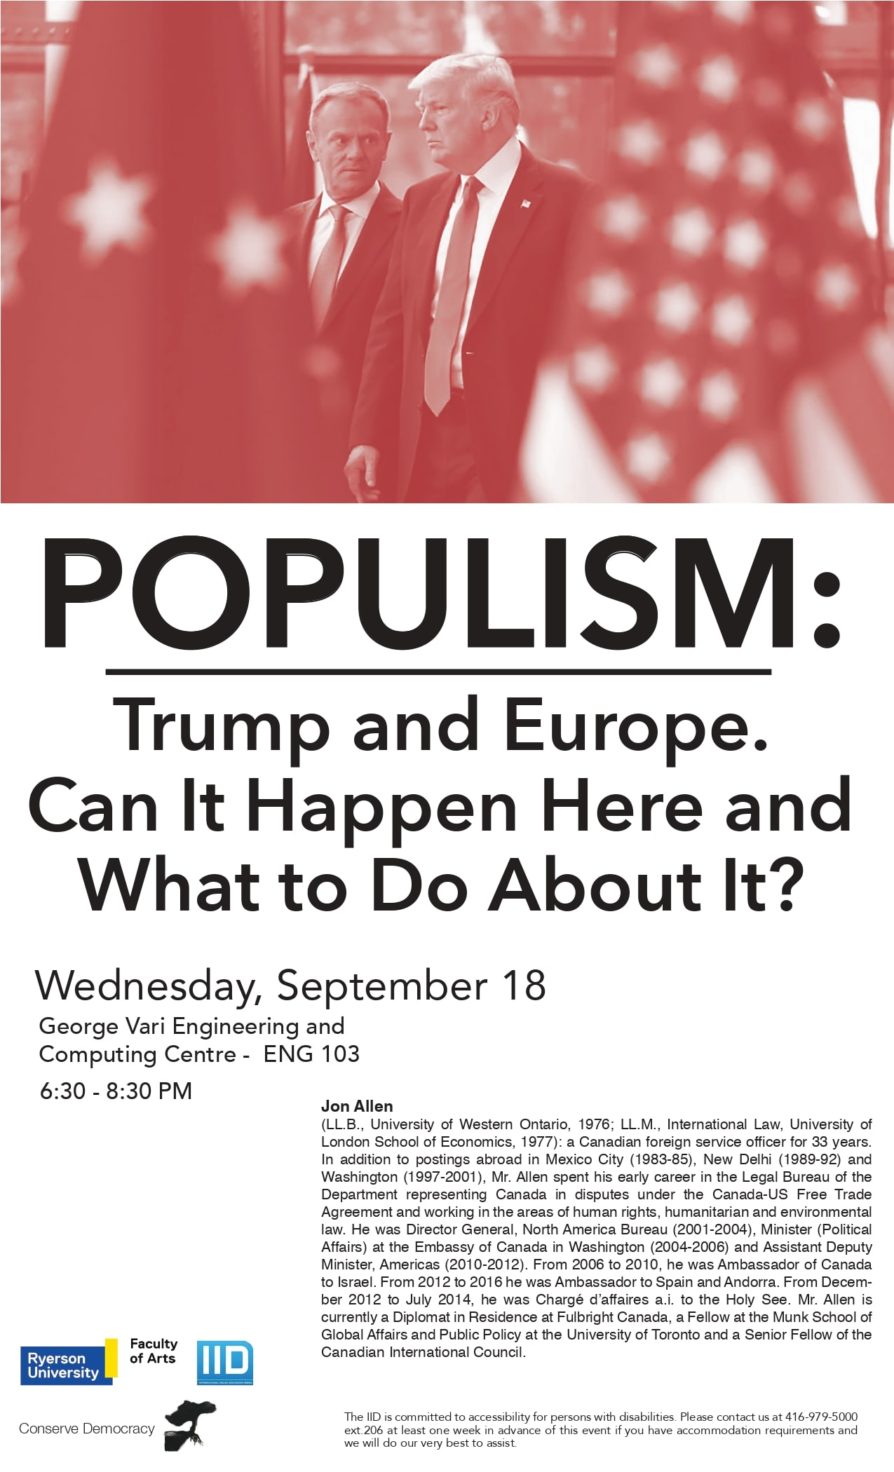 Populism: Trump and Europe. Can It Happen Here and What to Do About It?